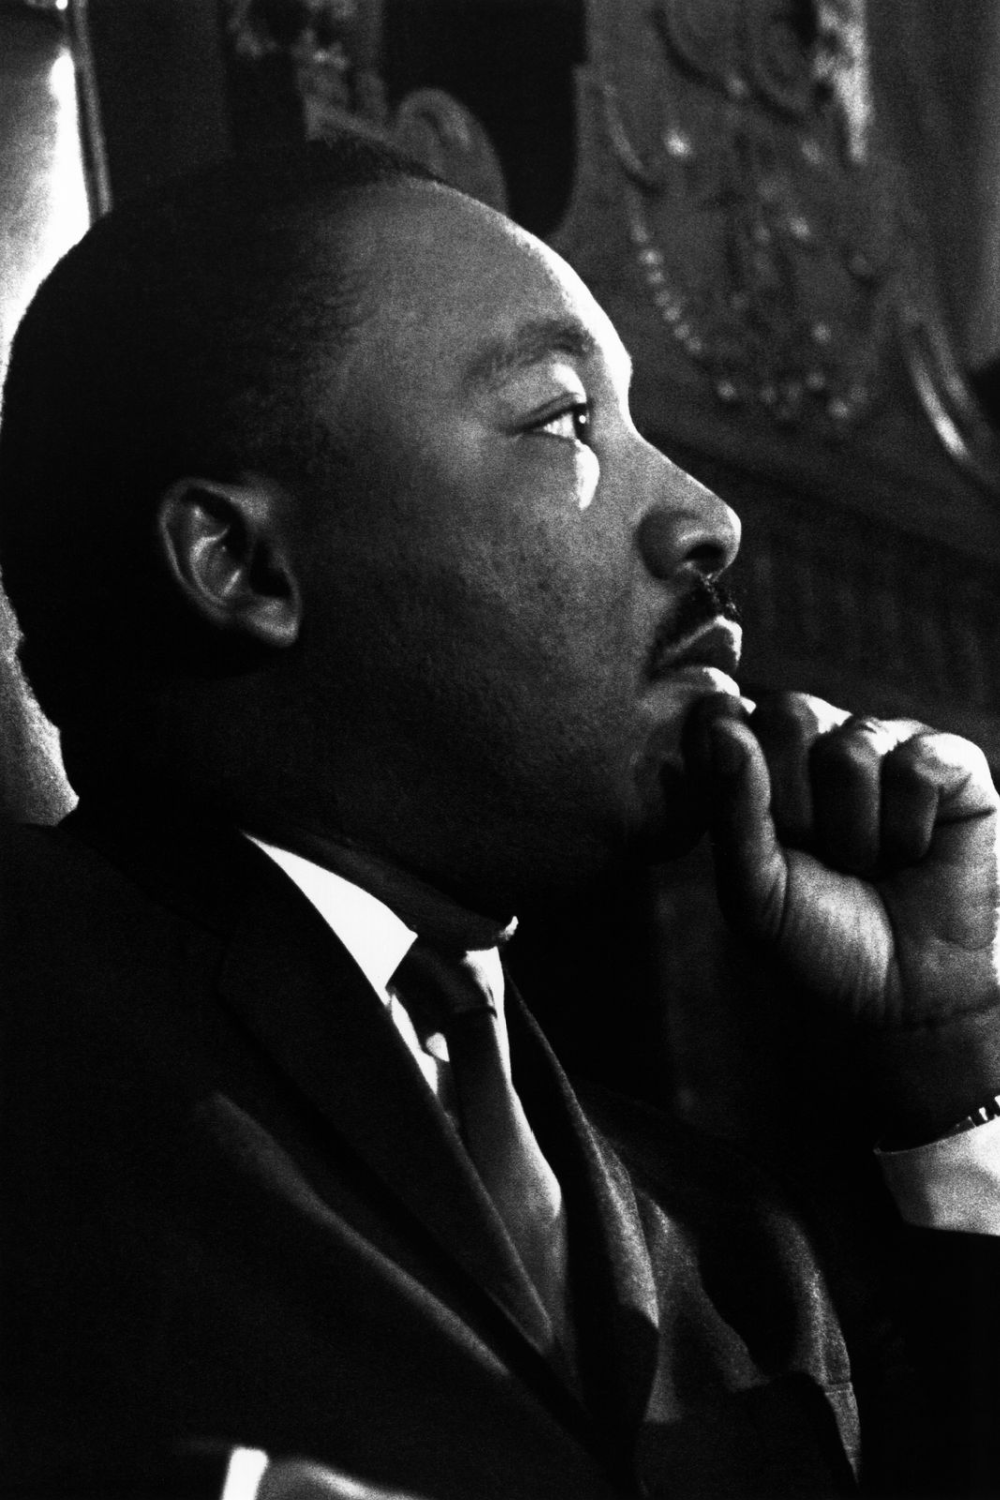 Black And White Photographic Artwork | Andrew Martin Martin Luther King | Oroa.com.